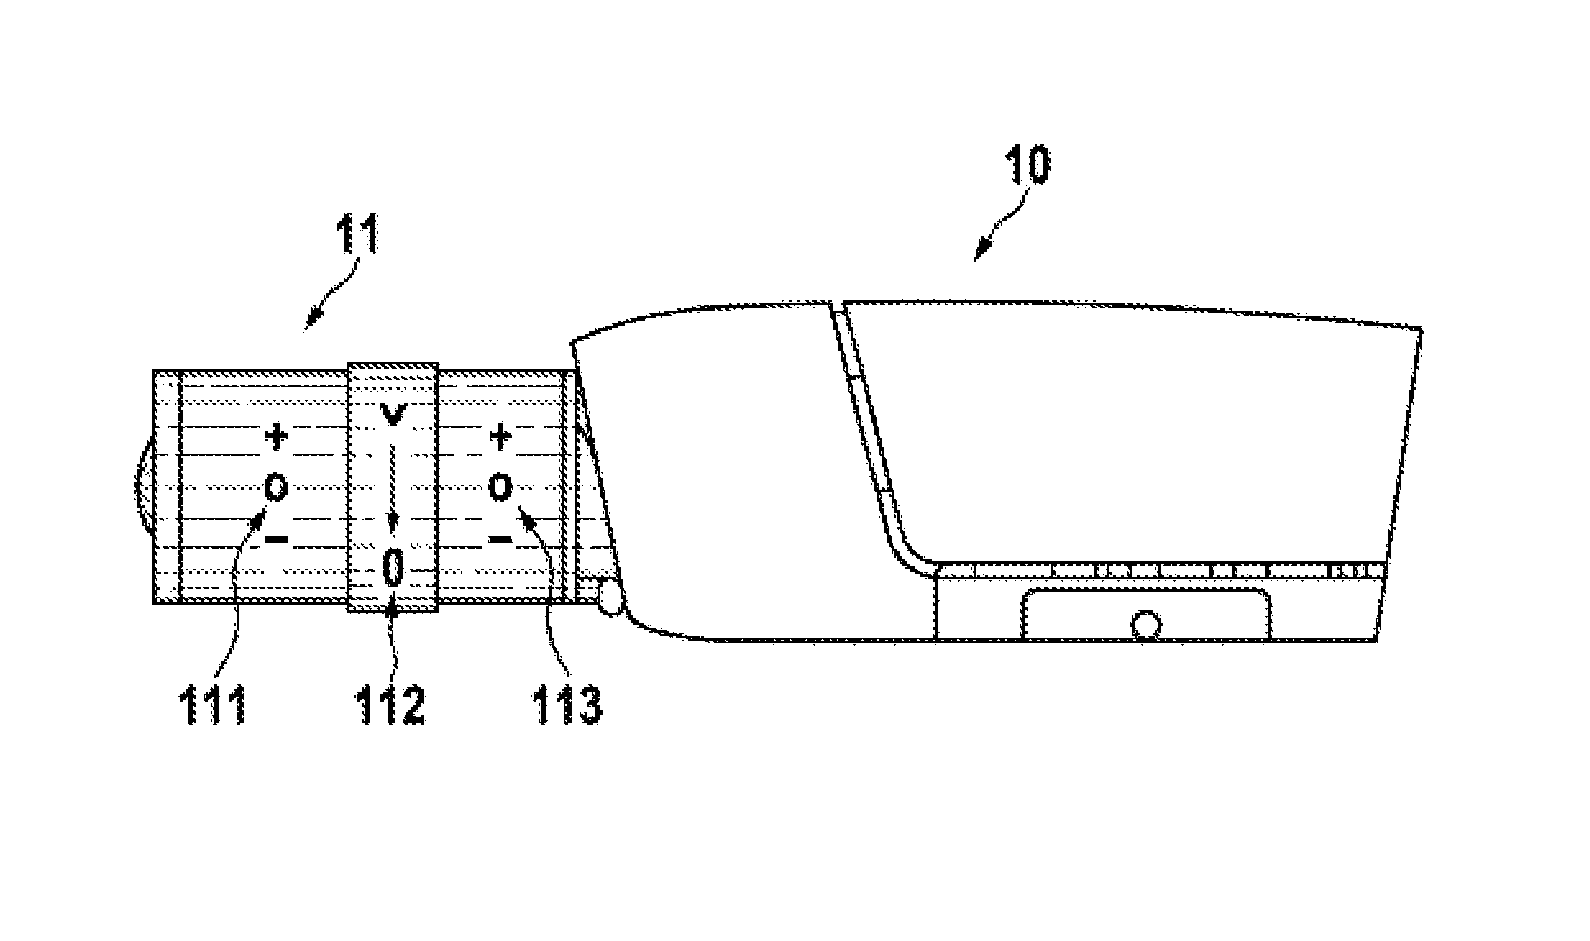 Device for assisting focusing of a camera